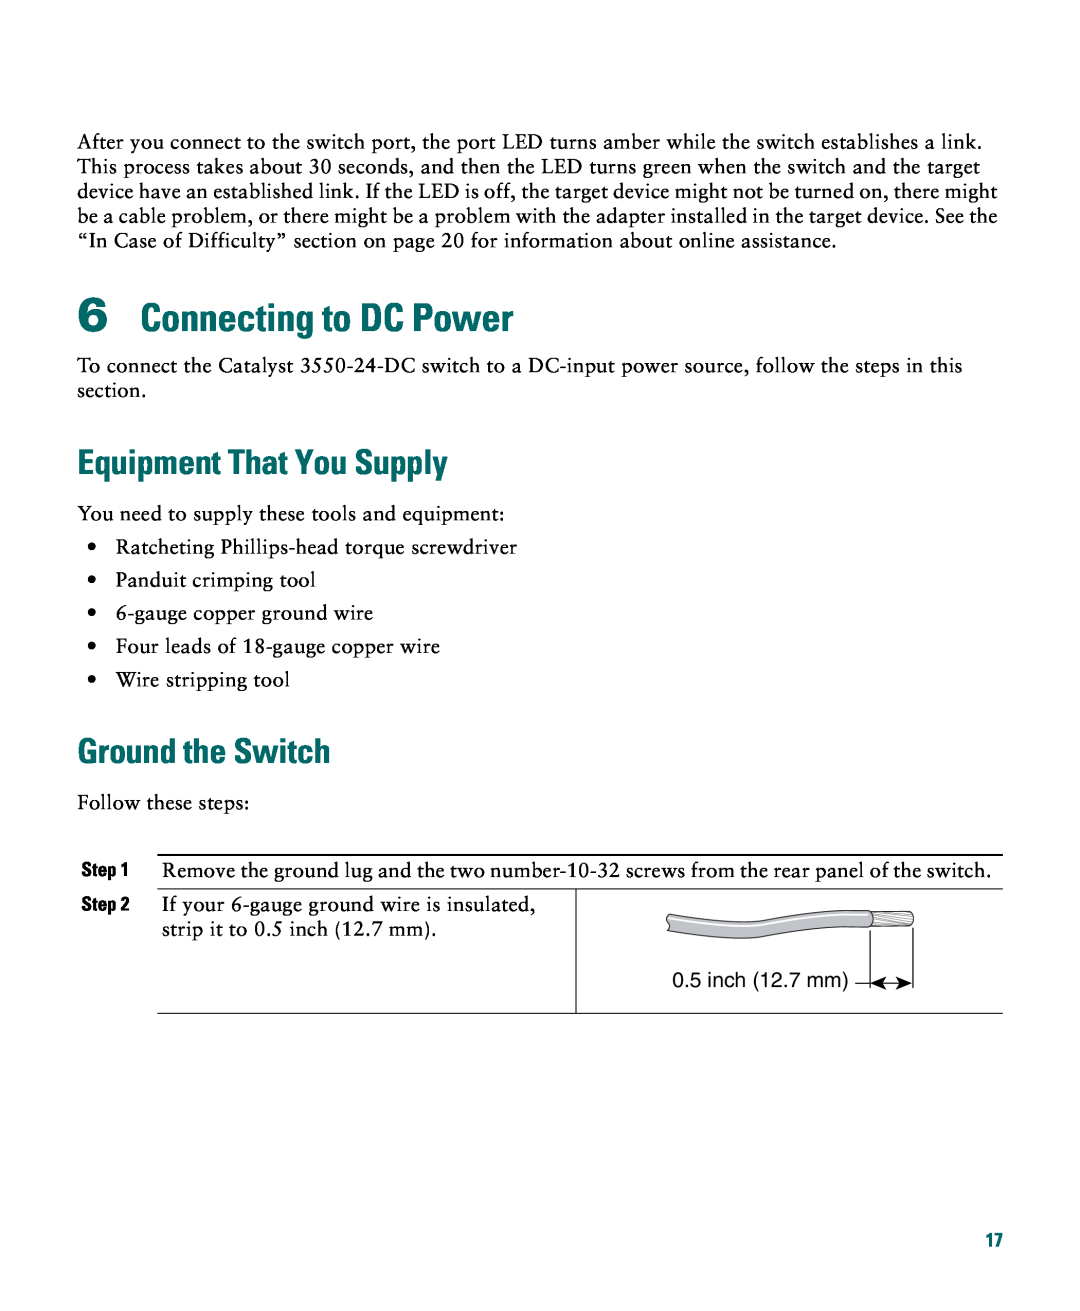 Cisco Systems Catalyst 3550 warranty Connecting to DC Power, Ground the Switch, Equipment That You Supply, inch 12.7 mm 